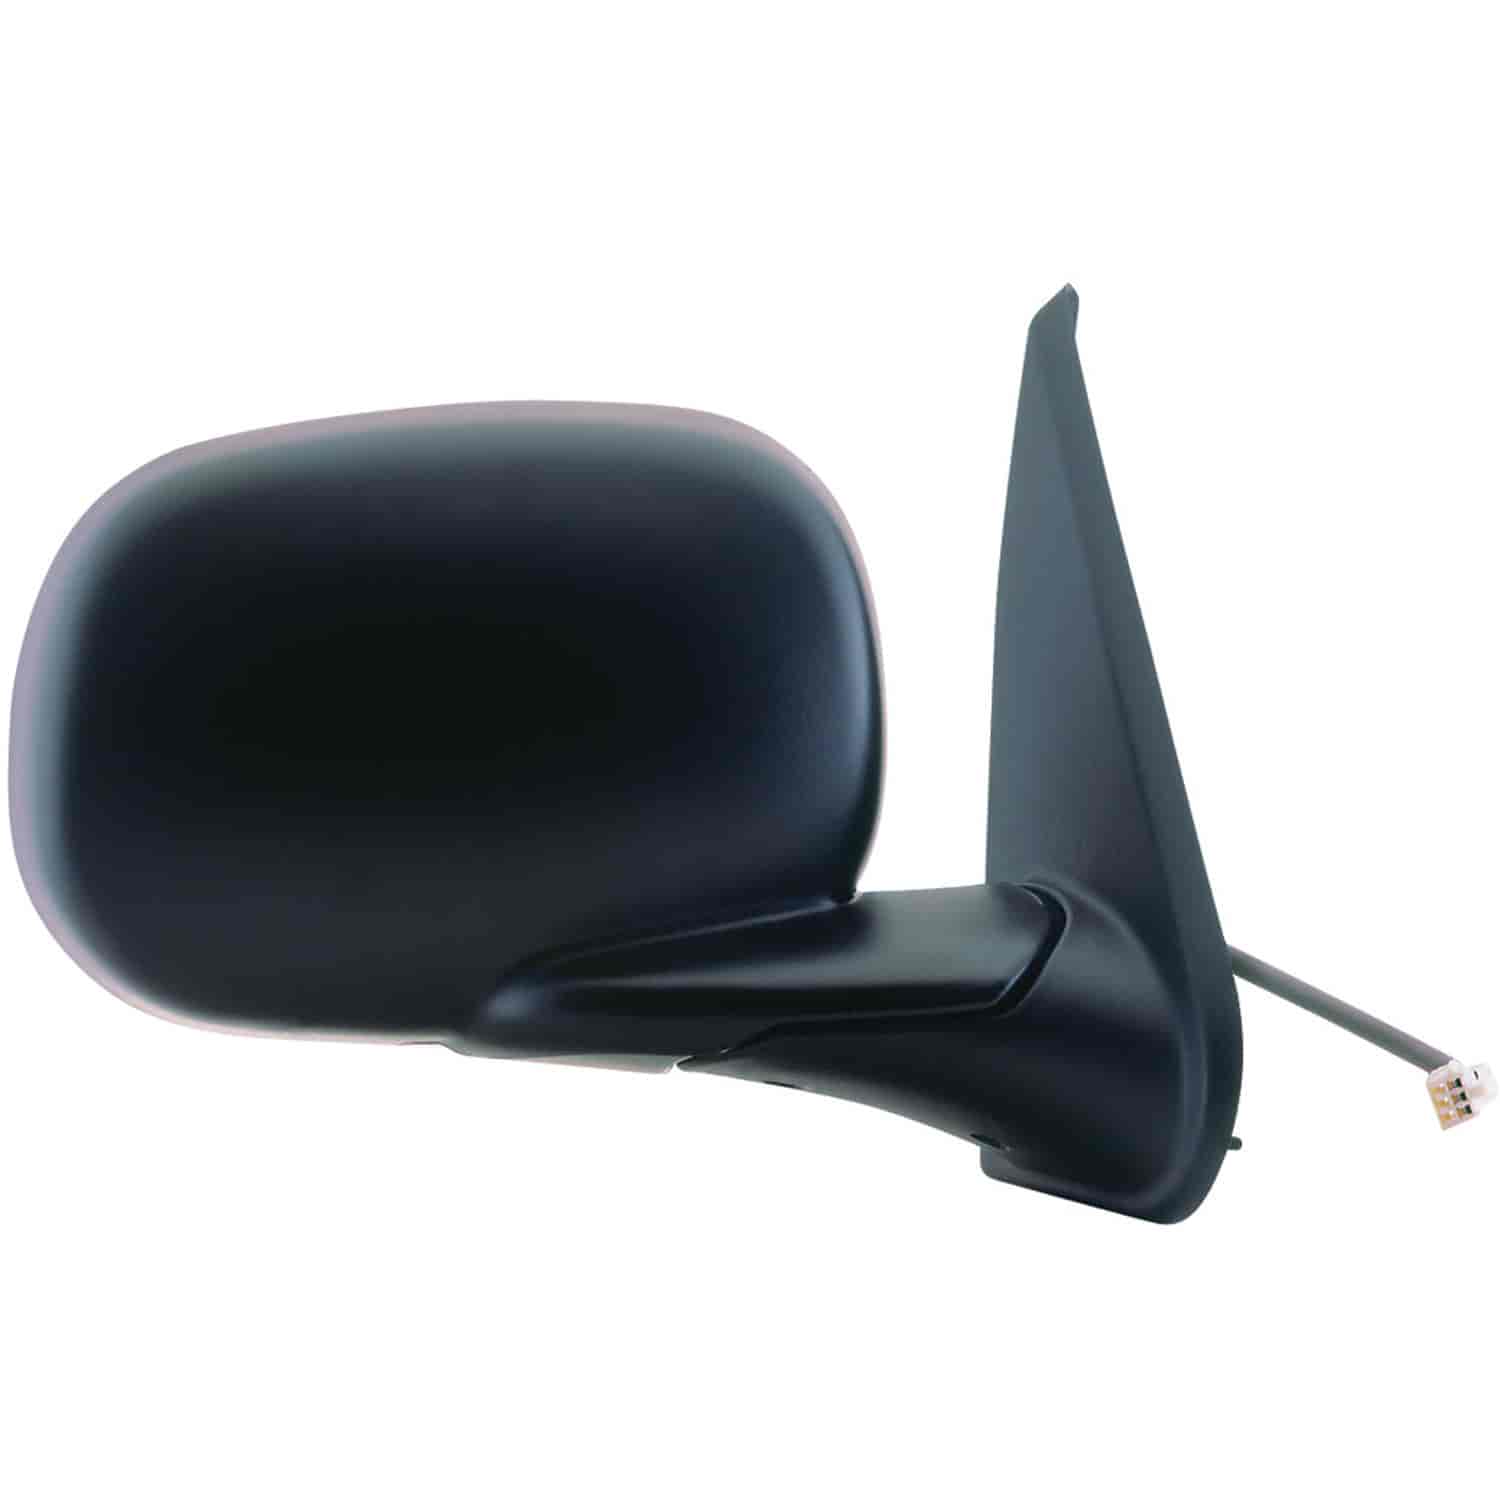 OEM Style Replacement mirror for 98-01 Dodge Full